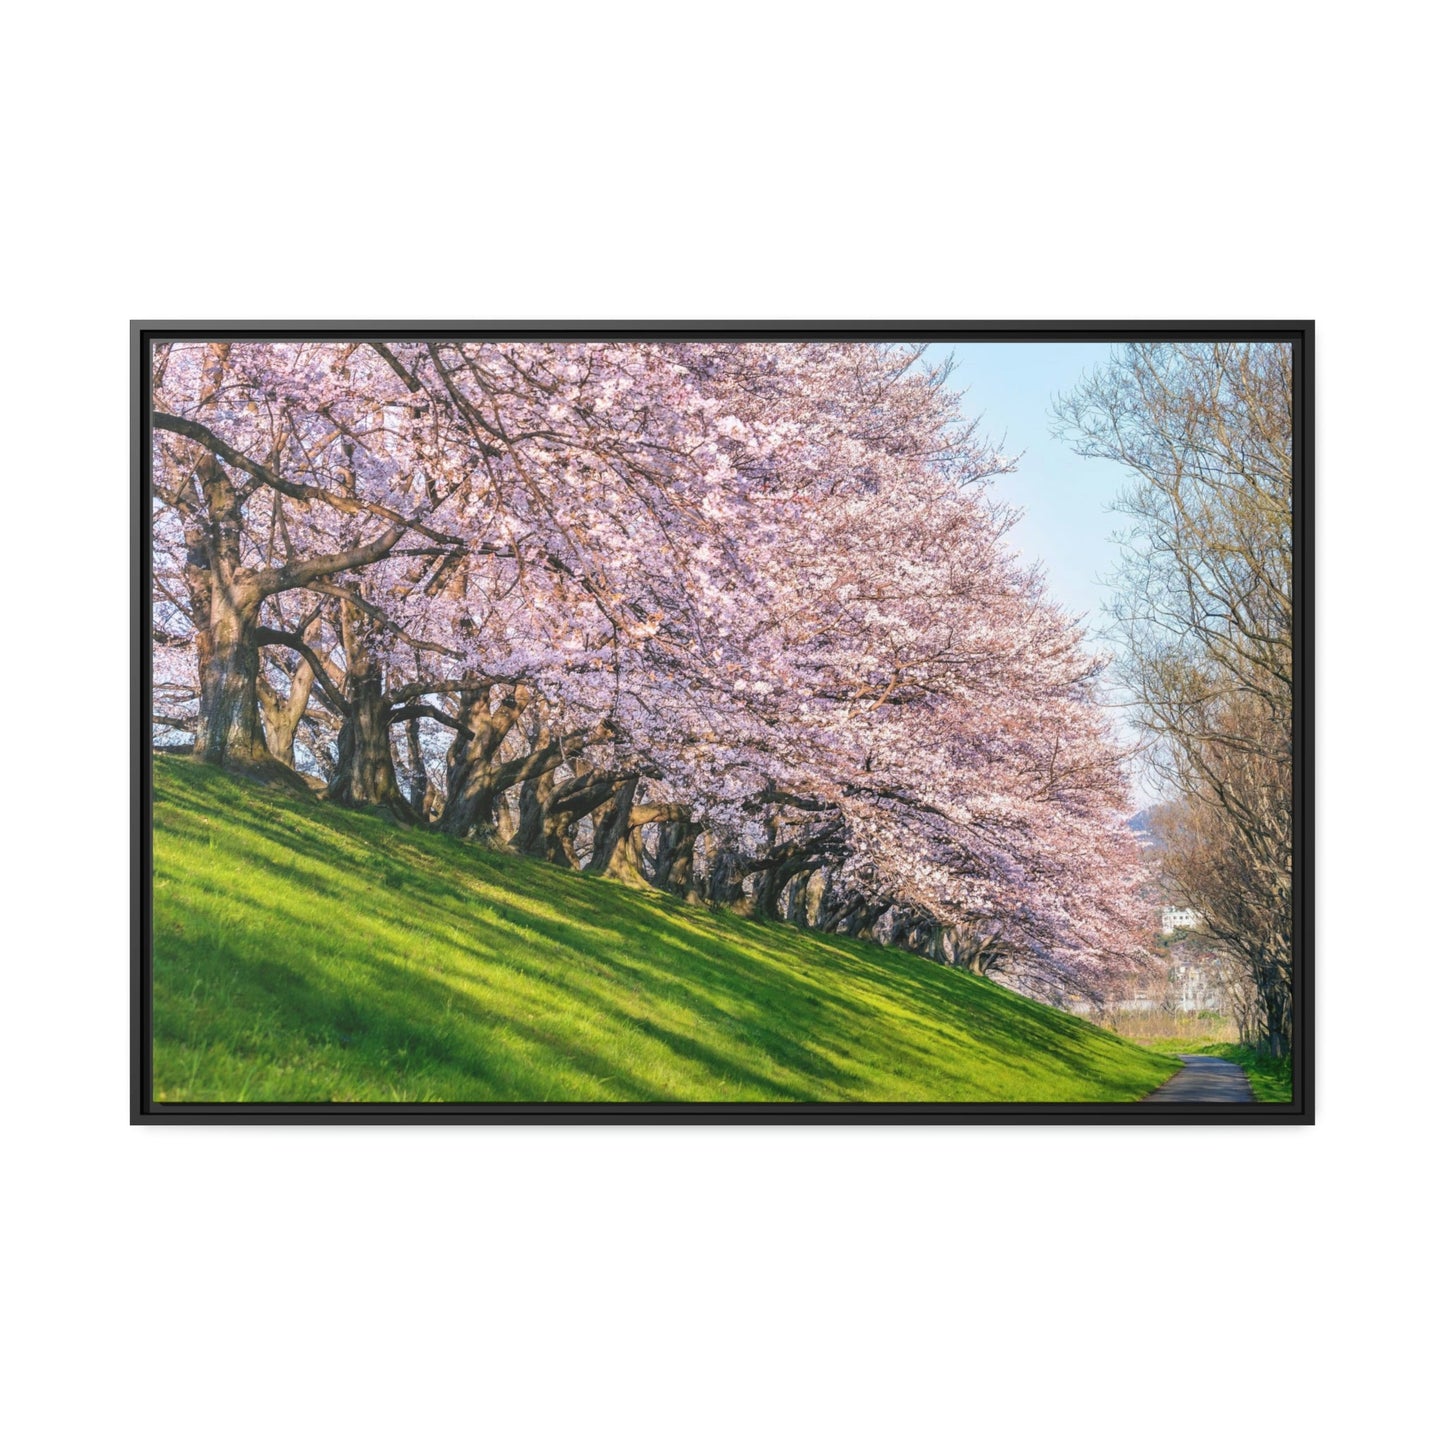 Enchanted Forest: Cherry Trees on Canvas & Poster